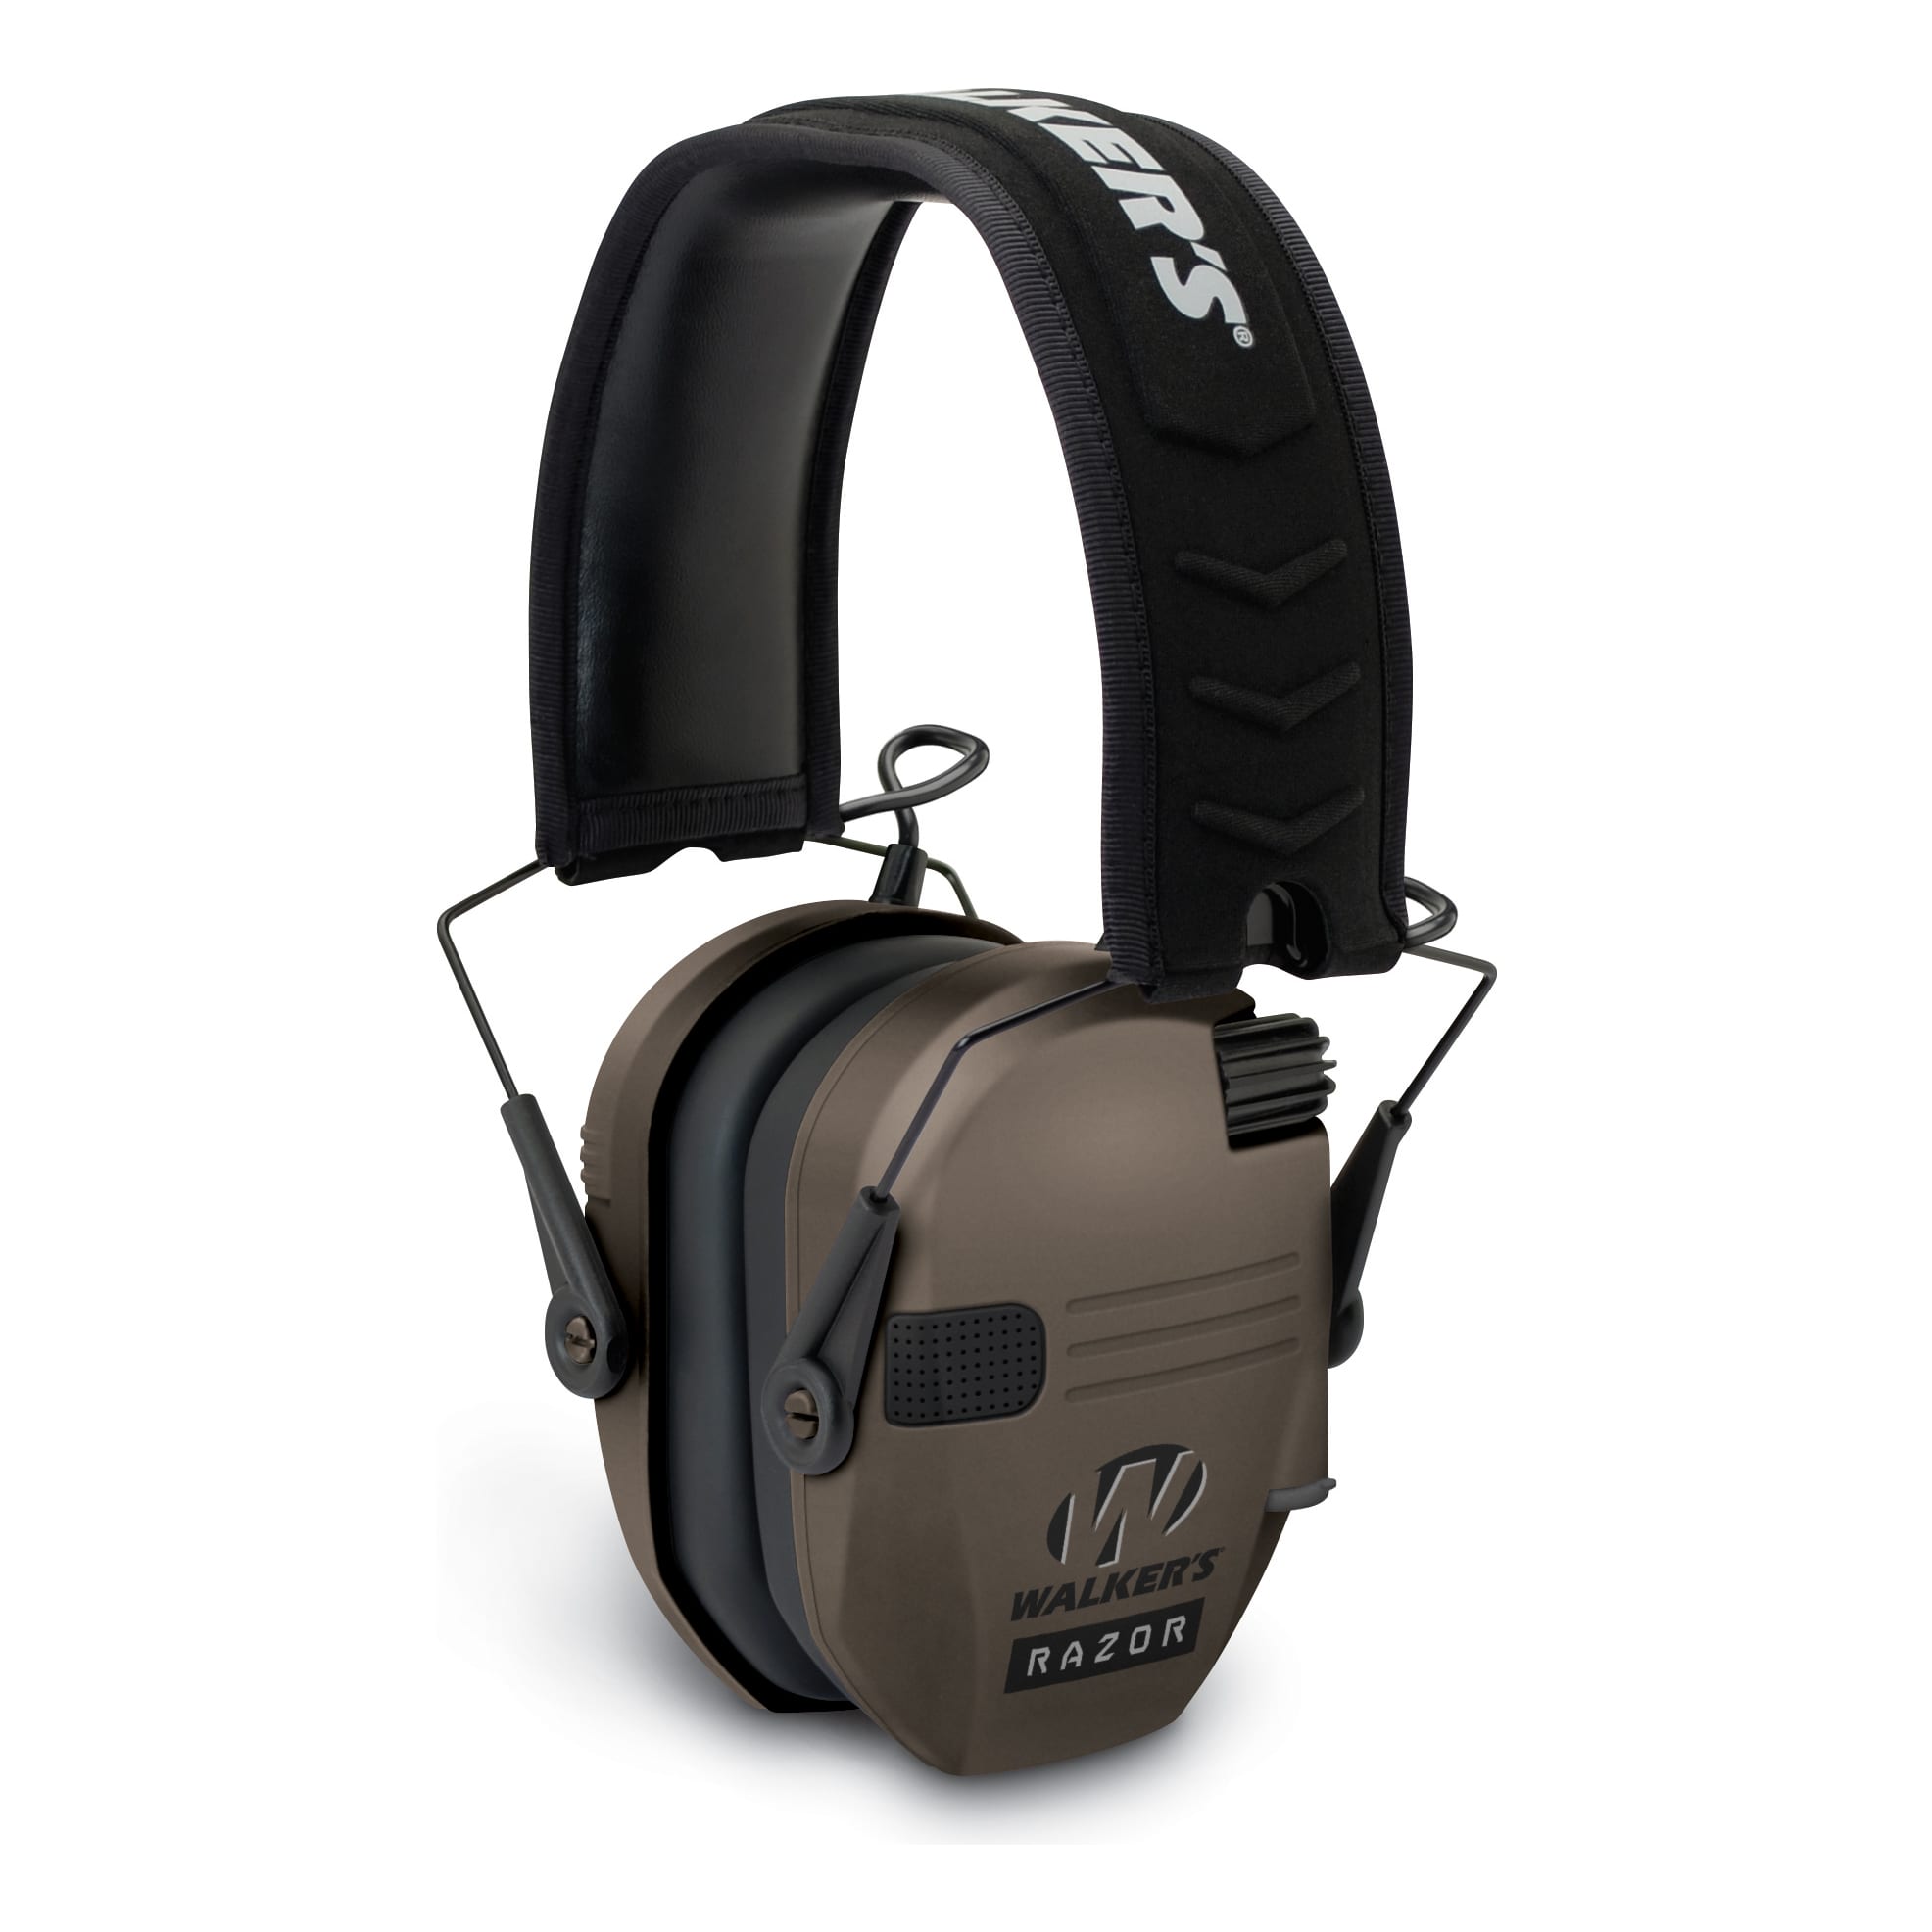 Winter Ear Protection for Hearing Aid Users